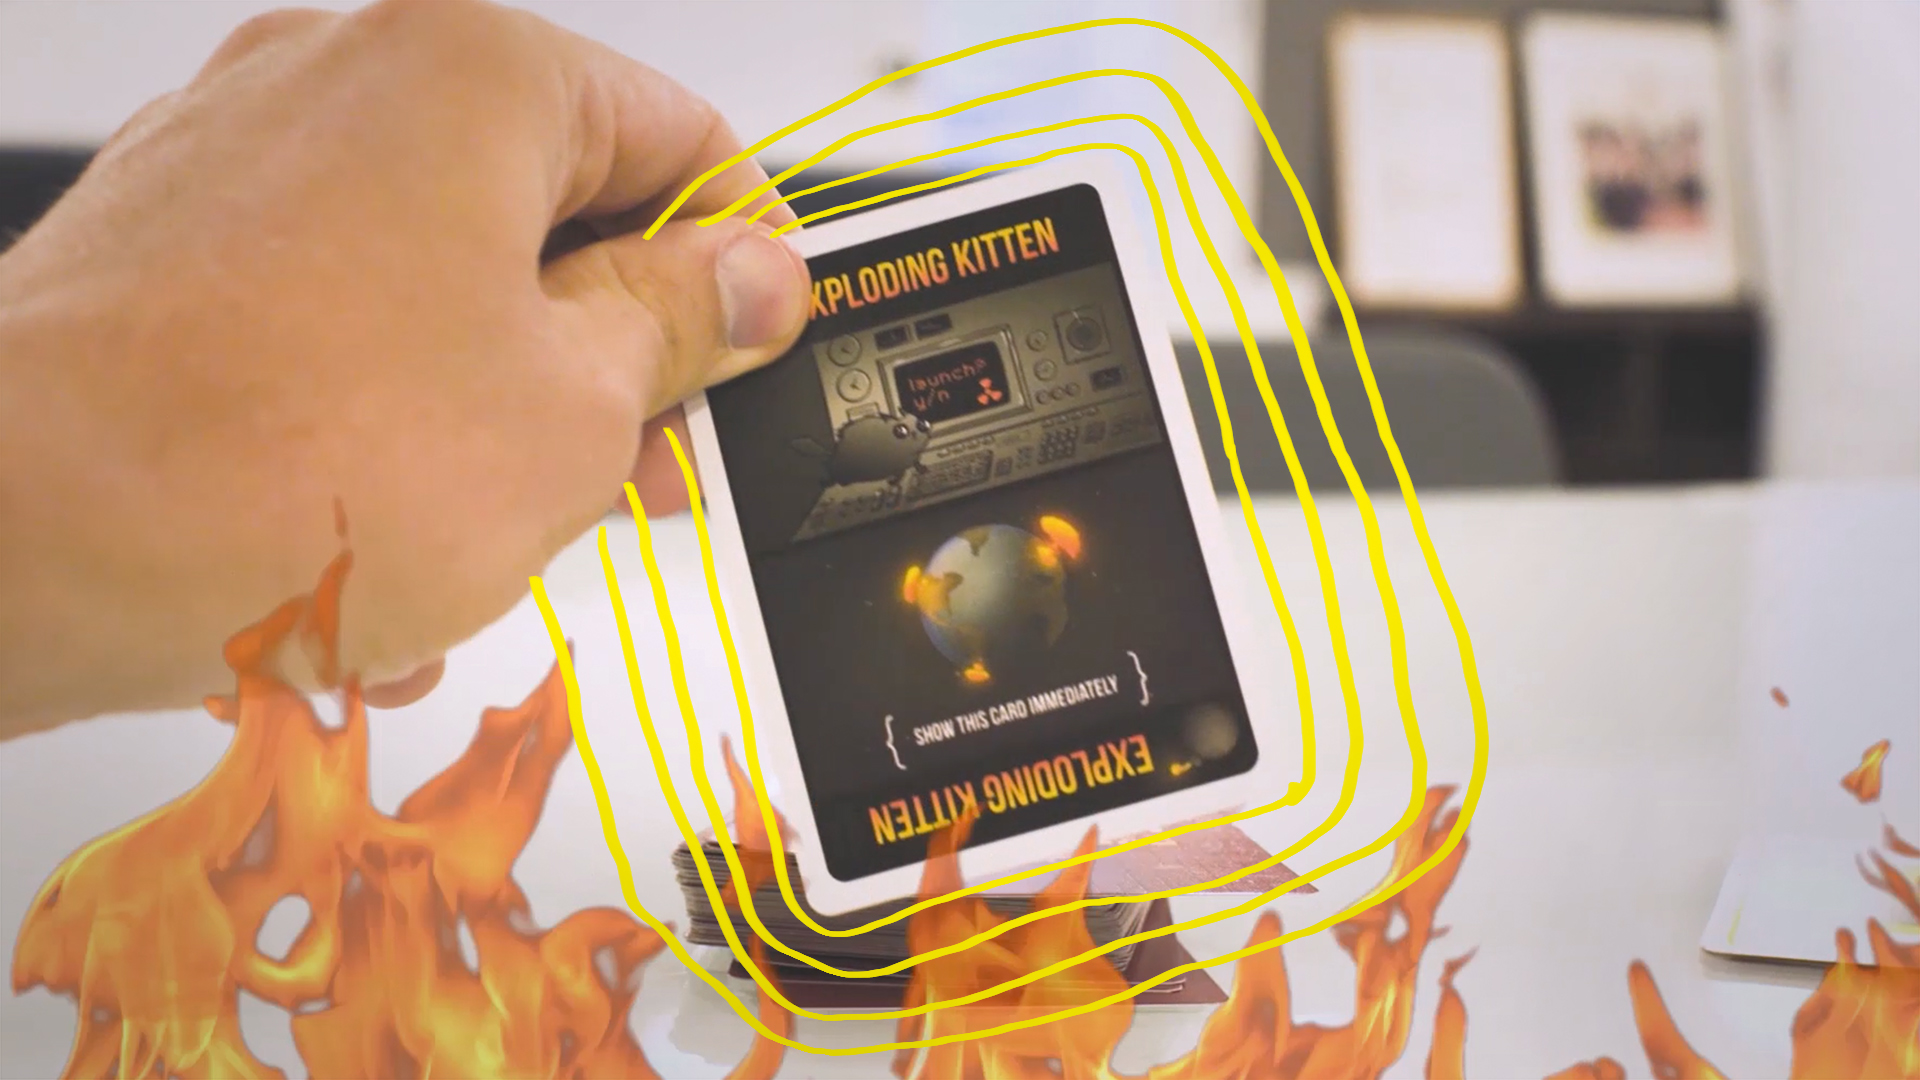 Exploding Kittens can explain crowdfunding	